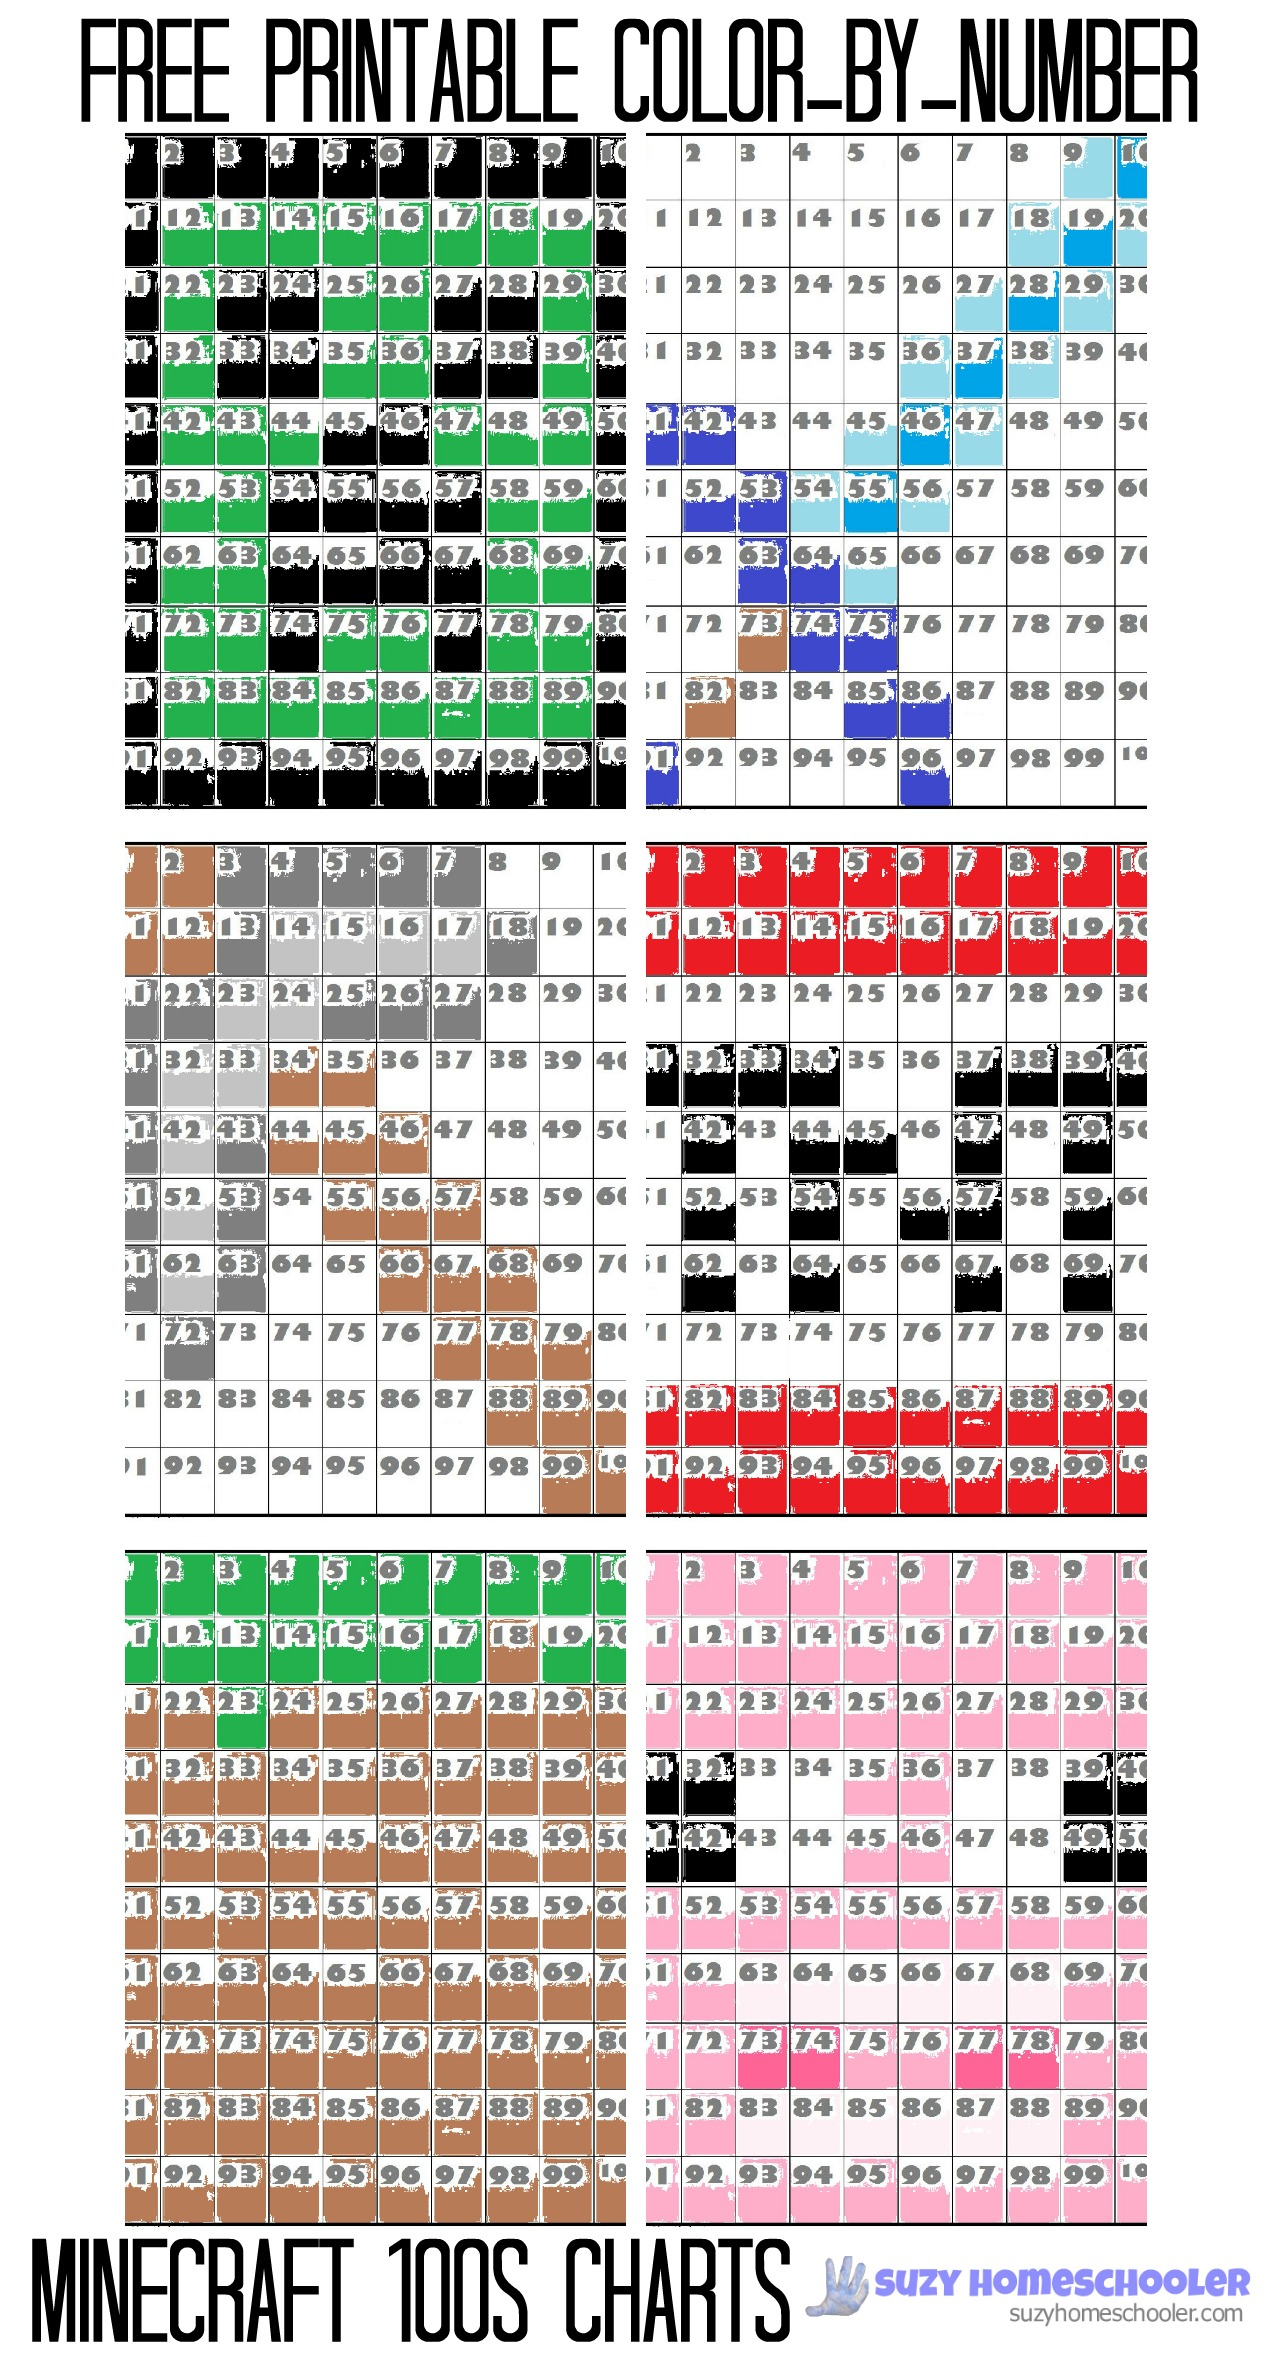 Free Printable Minecraft Color by Number 100s Chart 